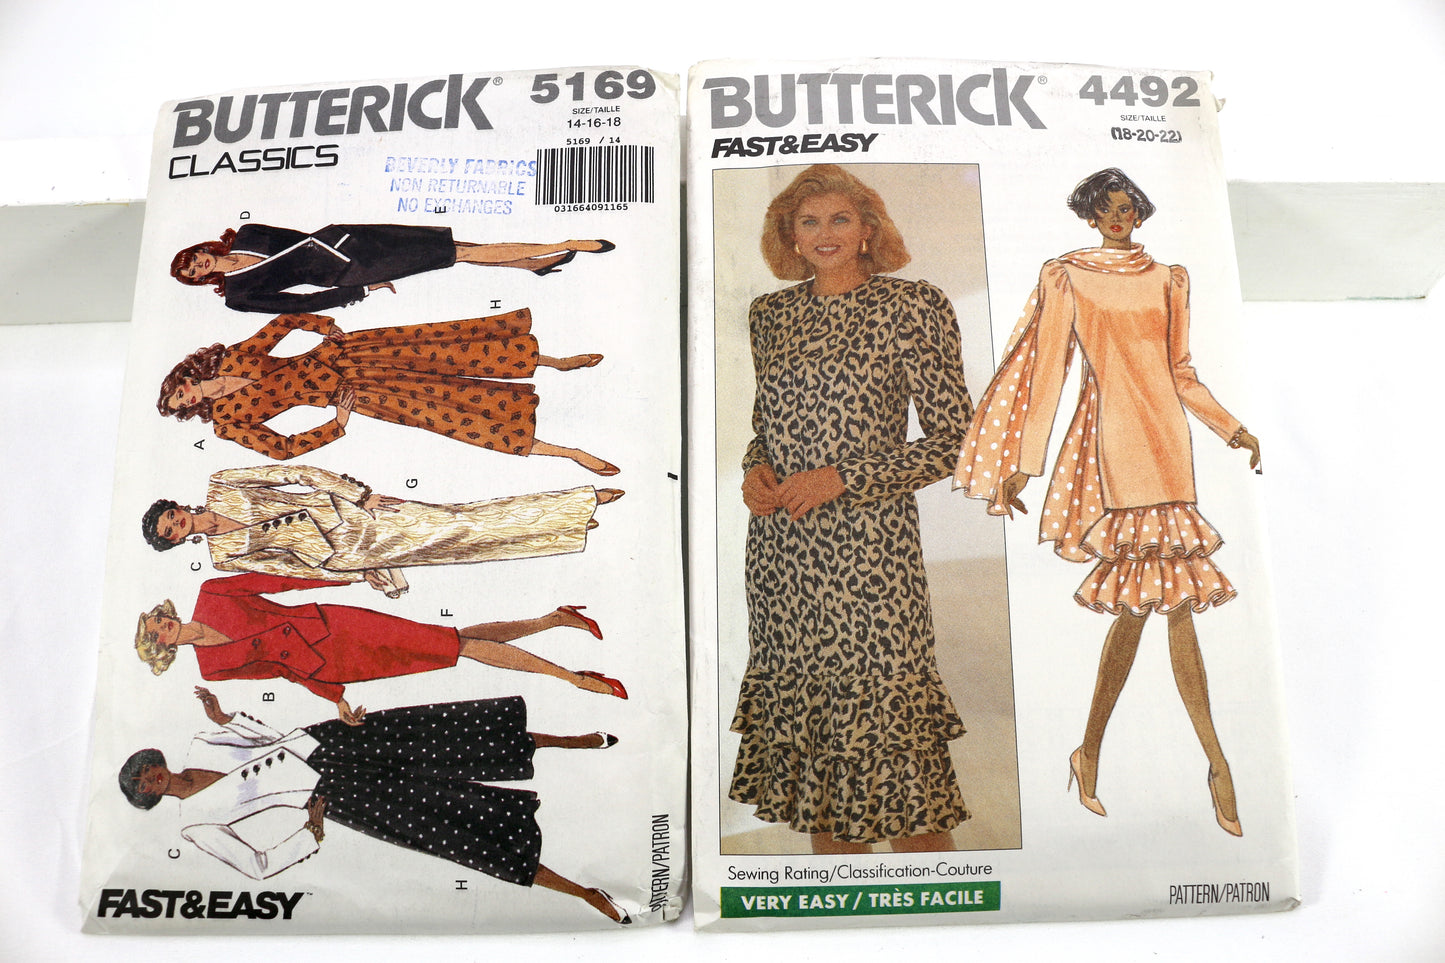 Butterick 5169 Skirt and Top Sewing Pattern or Butterick 4492 Top & Skirt Pattern